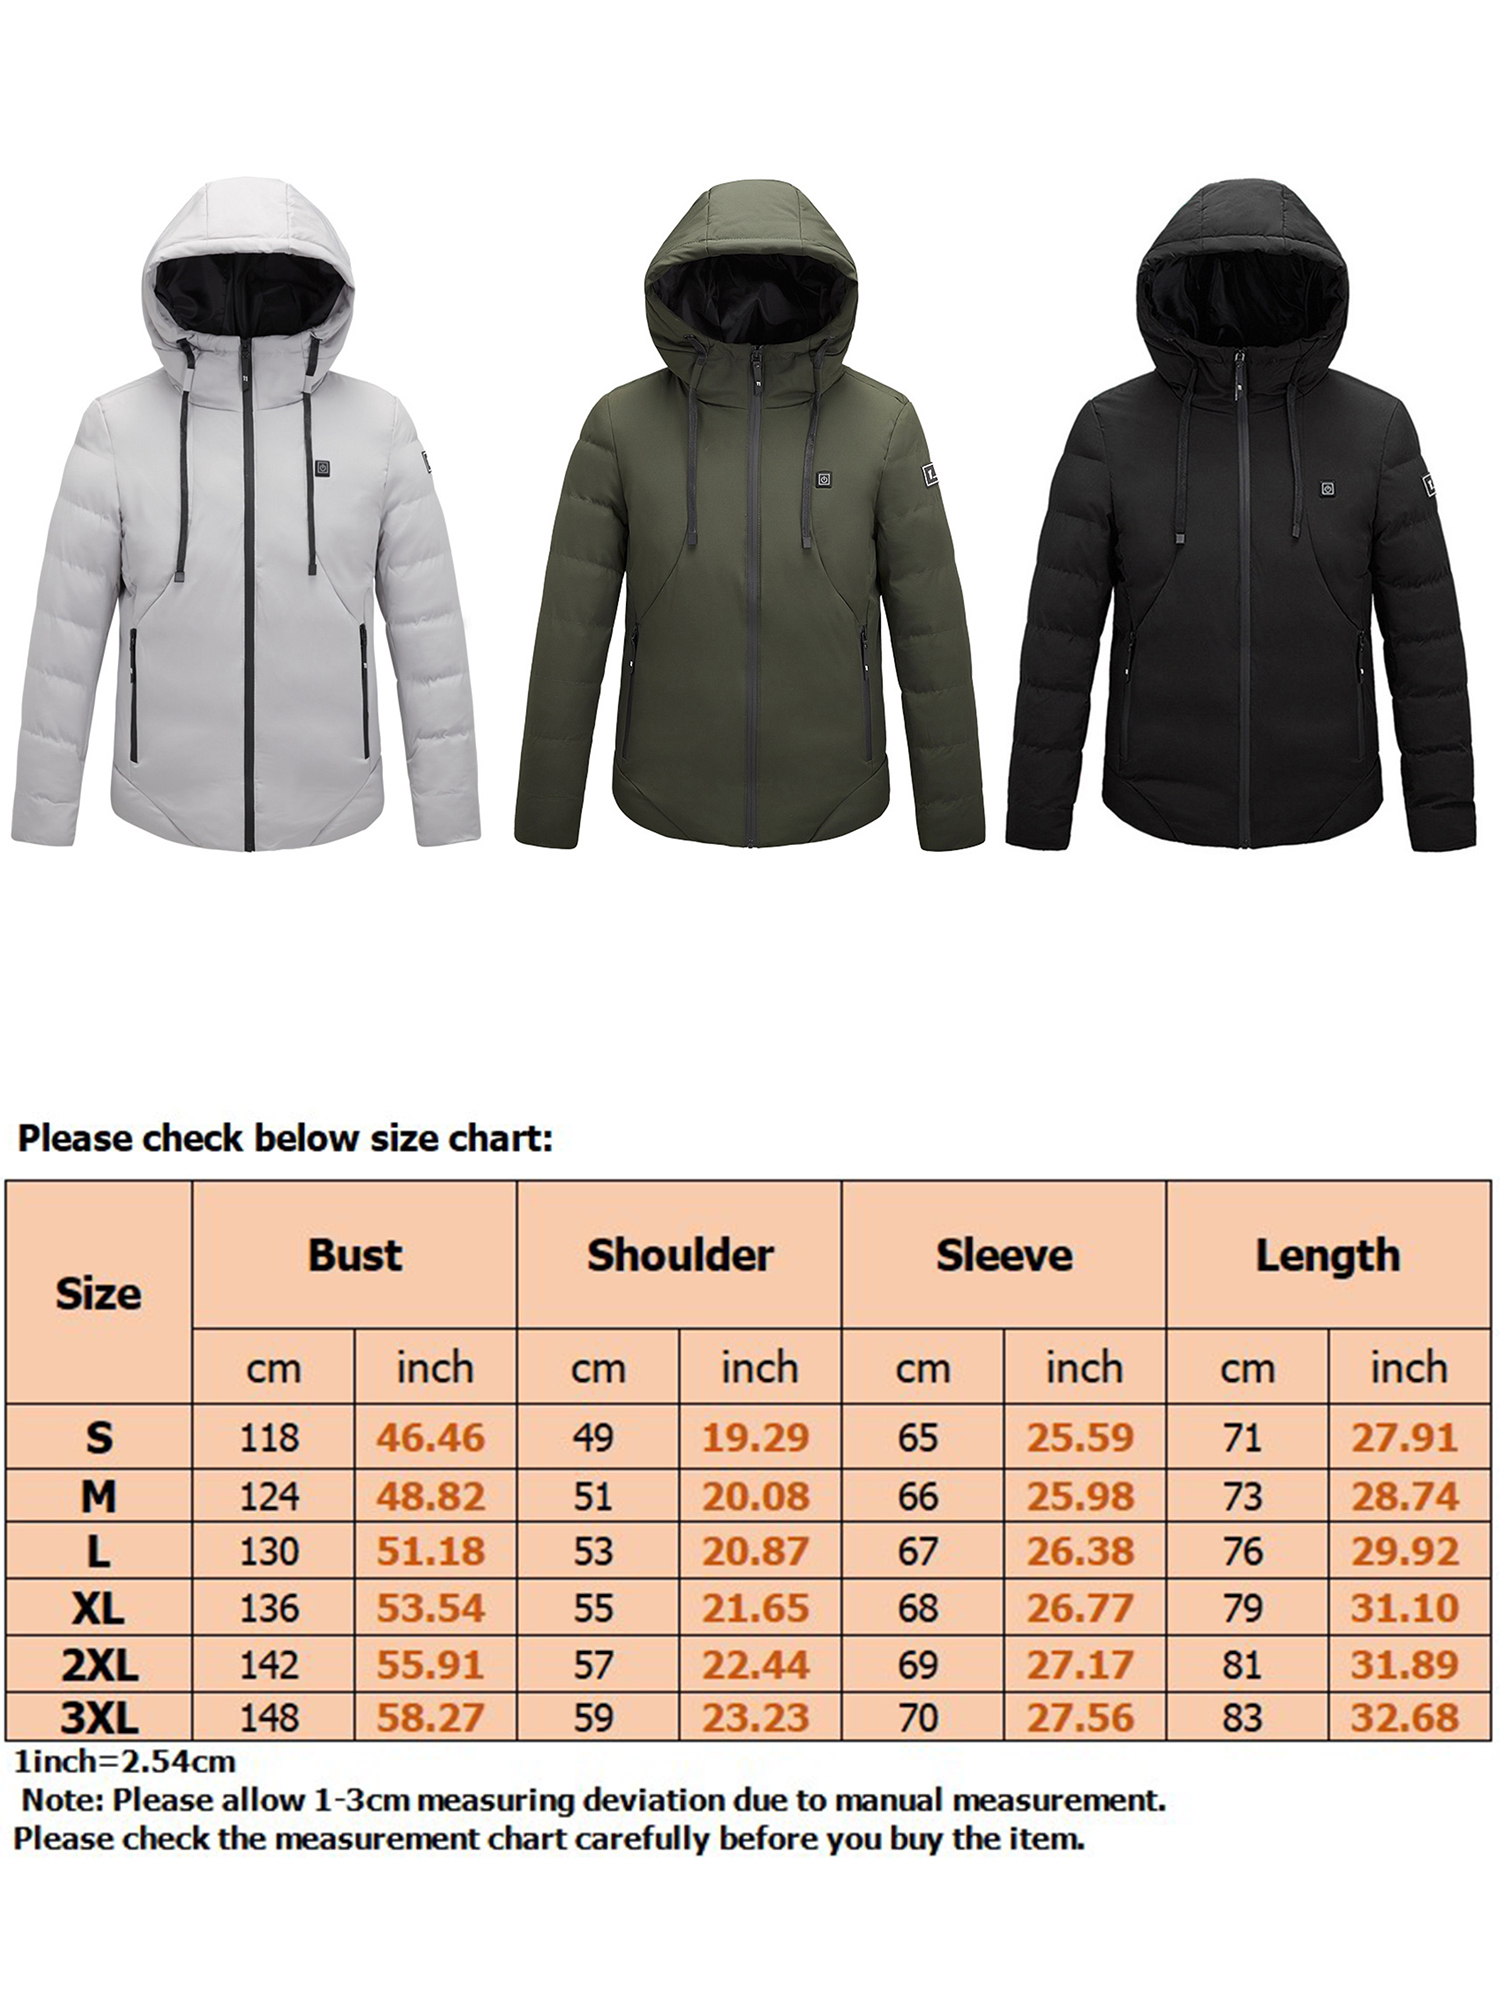 UKAP Men Electric Coat Heated Jacket Hooded Outwear Outdoor Warmth Jackets with 10000mAh Power Bank - image 2 of 11